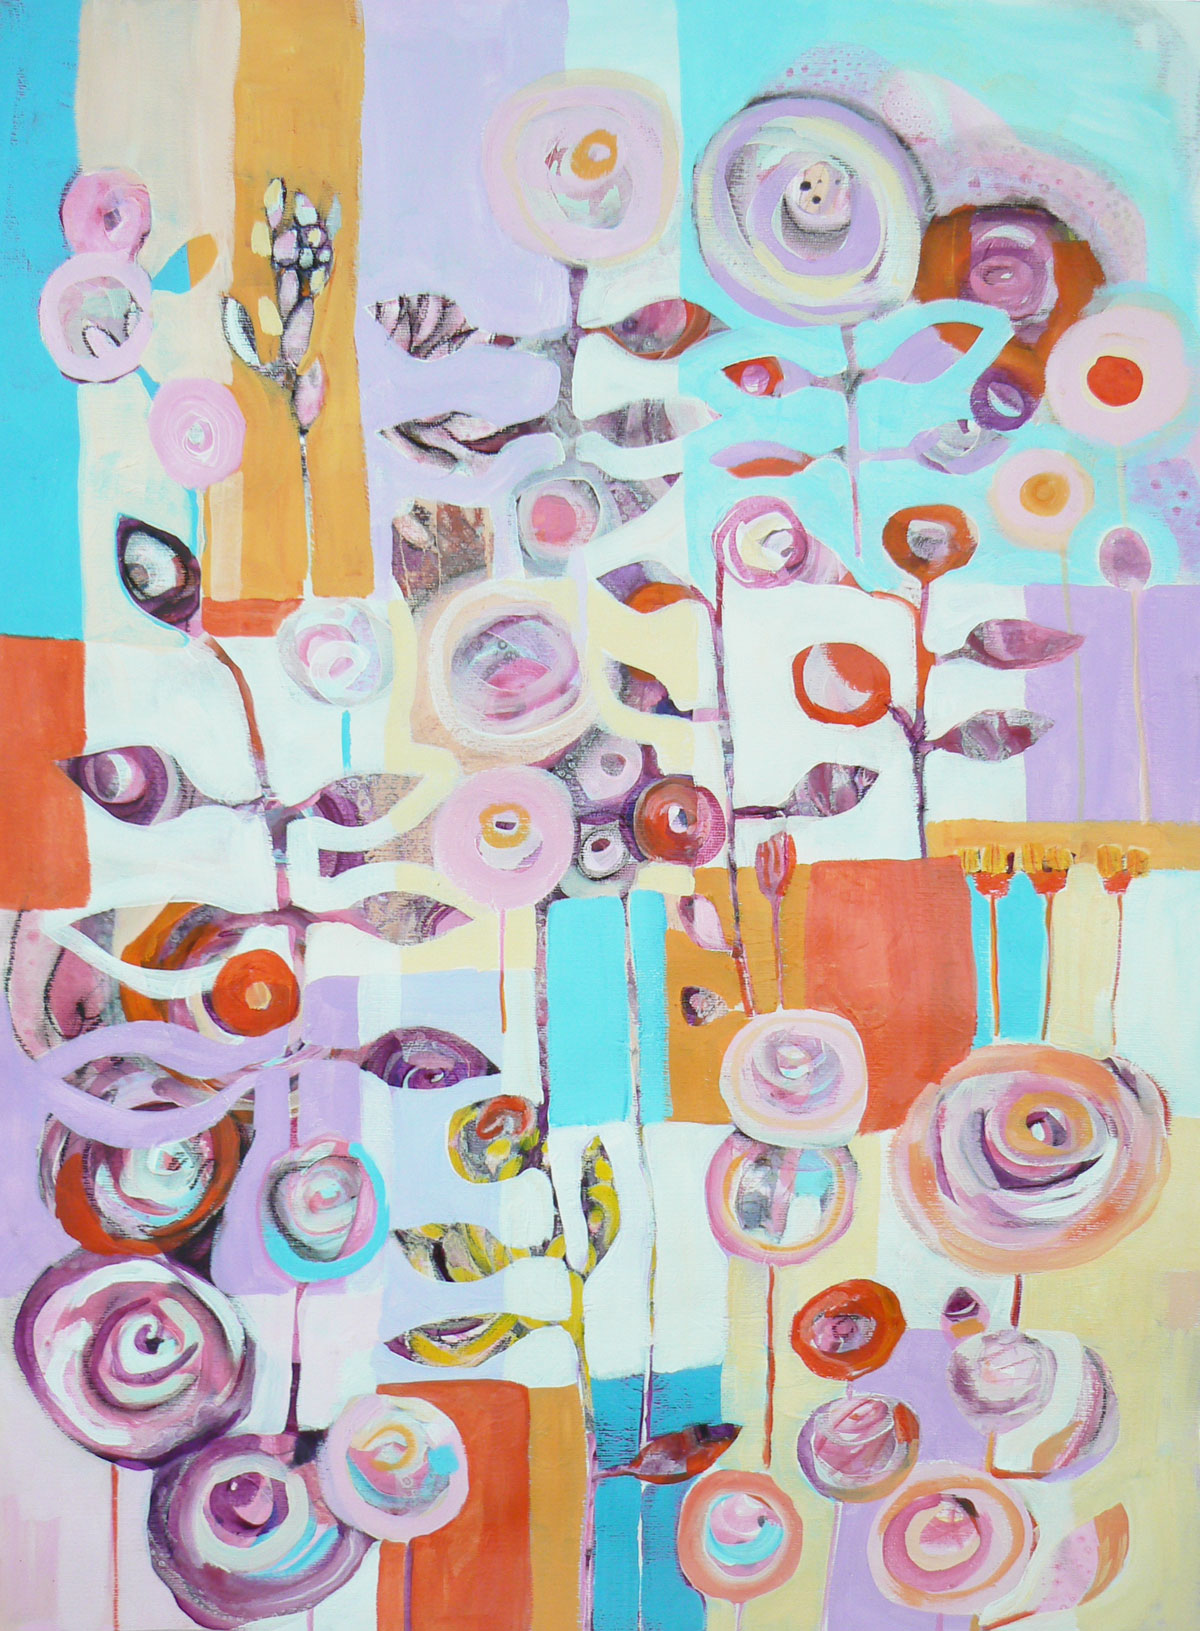 Patchwork garden (2016) Acrylic painting by Carolynne Coulson